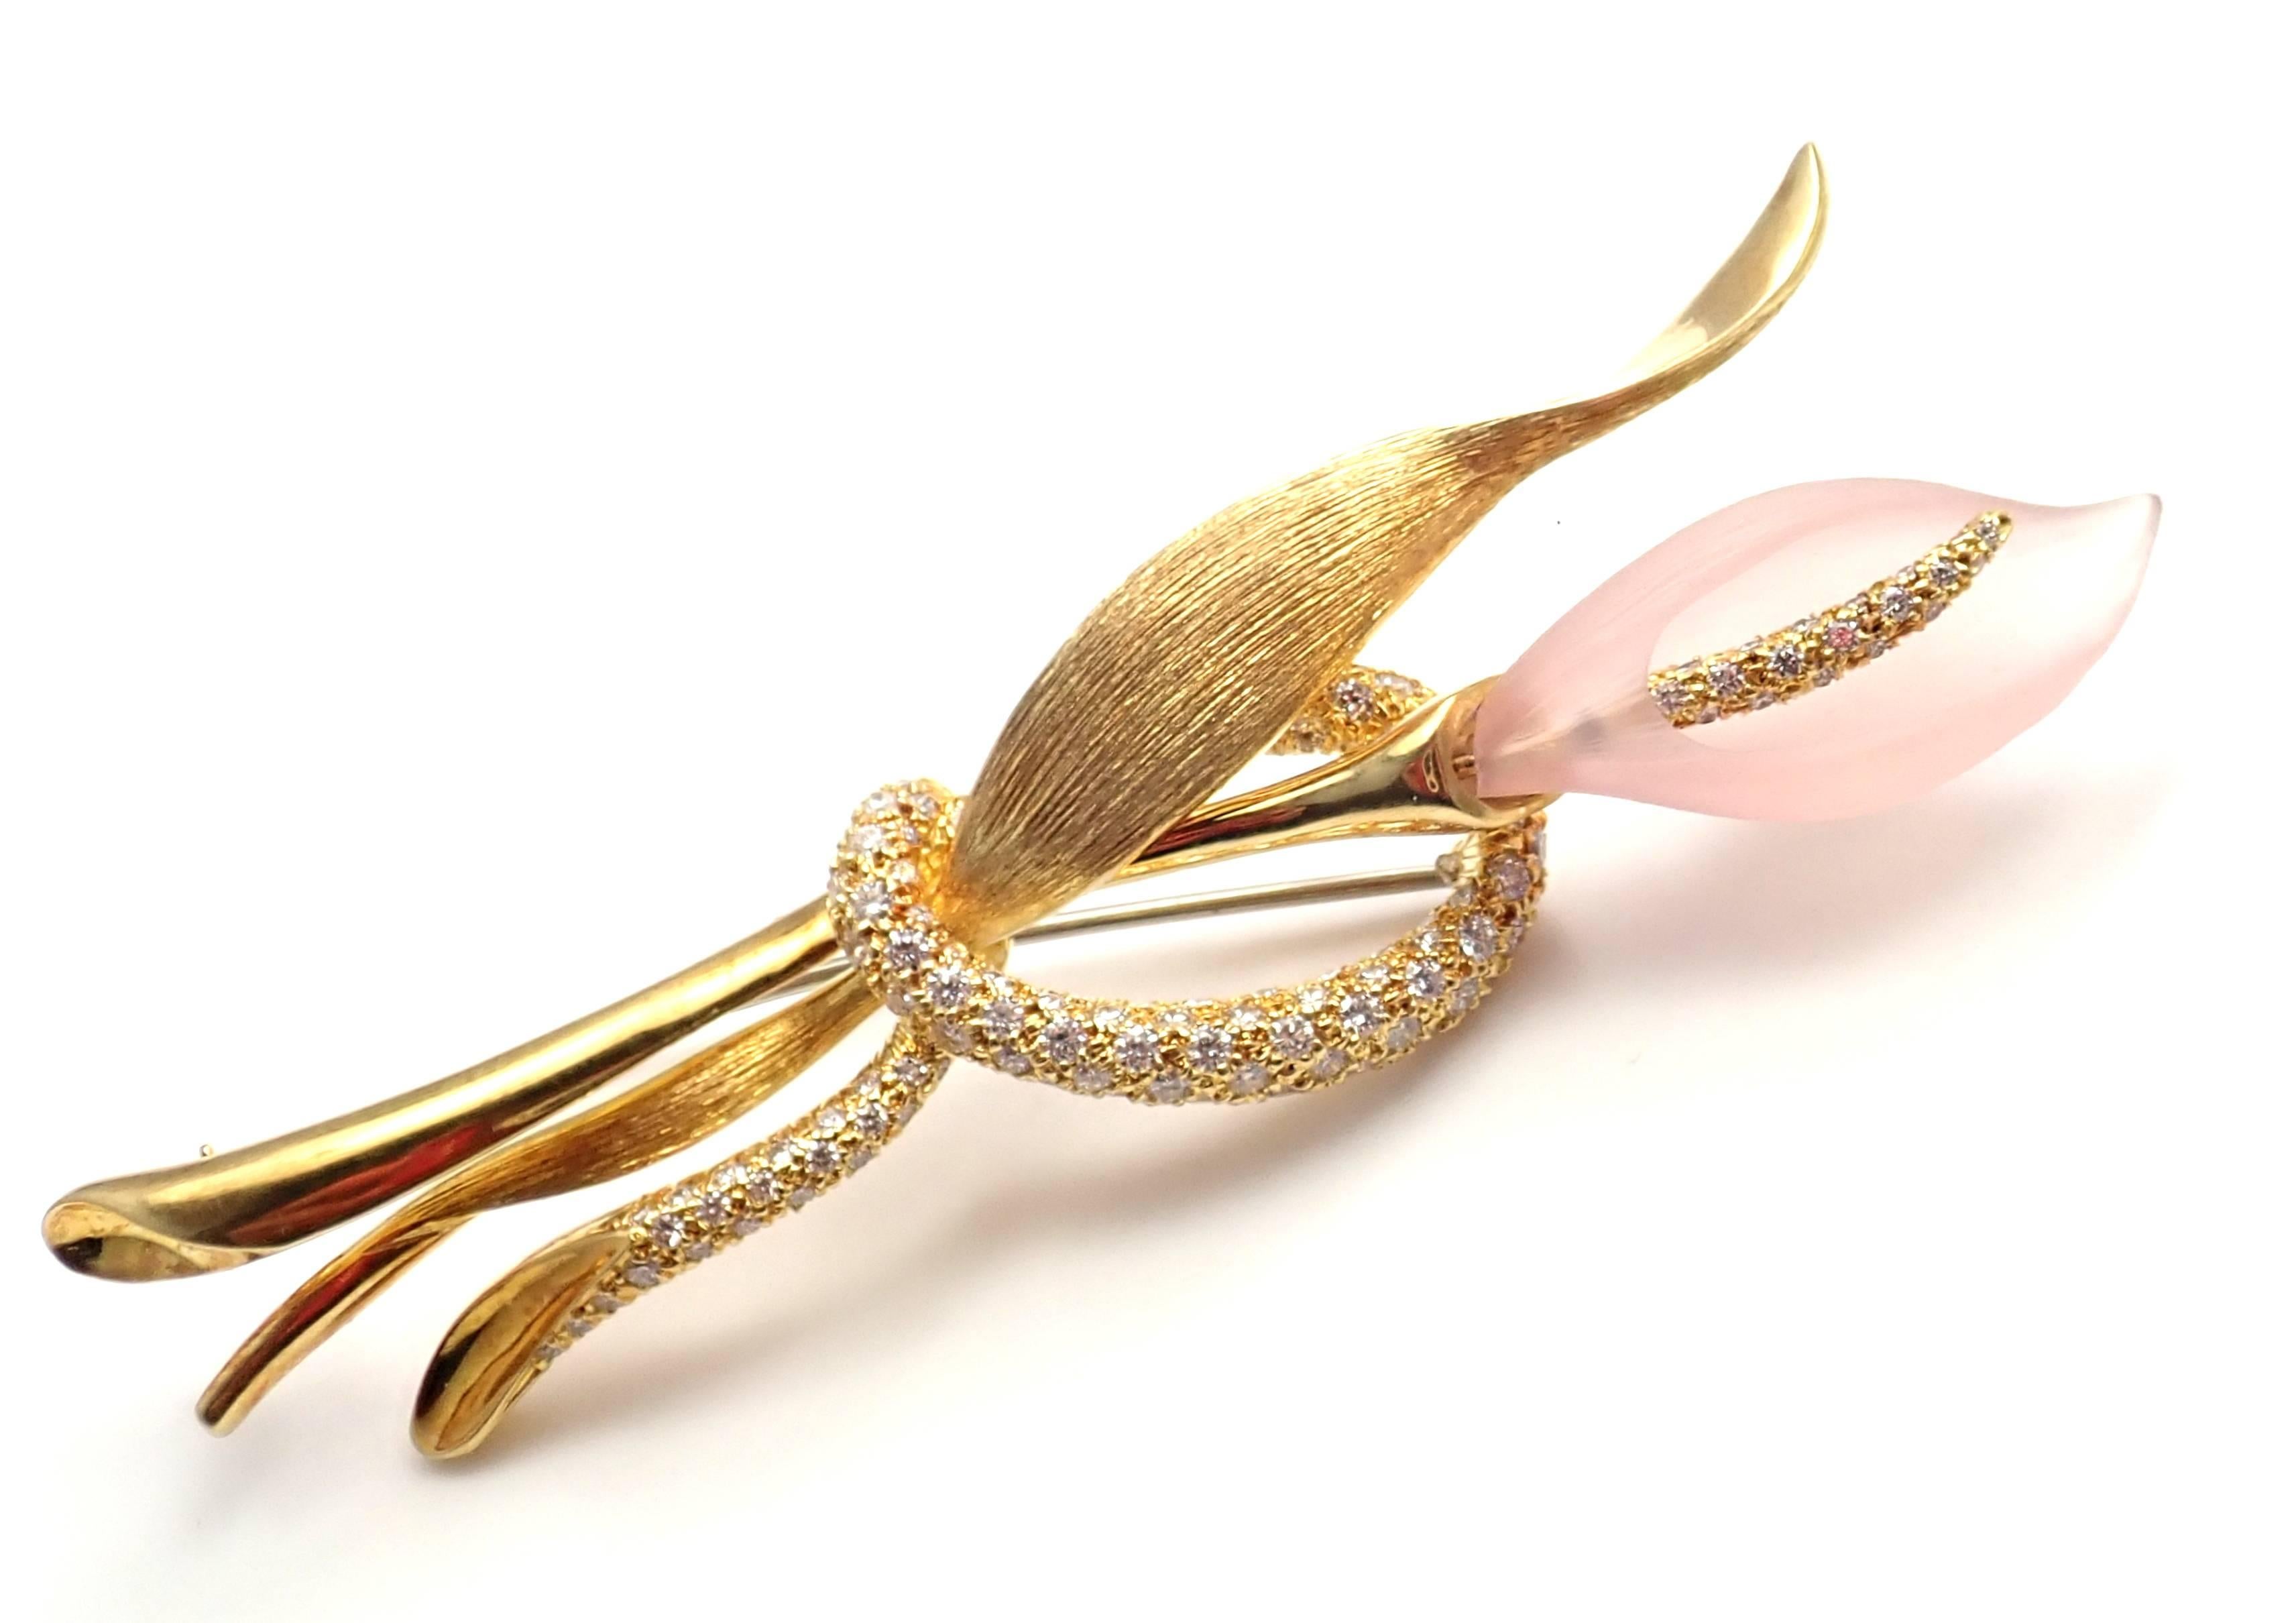 Brilliant Cut Henry Dunay Diamond Rose Quartz Calla Lily Flower Yellow Gold Pin Brooch For Sale